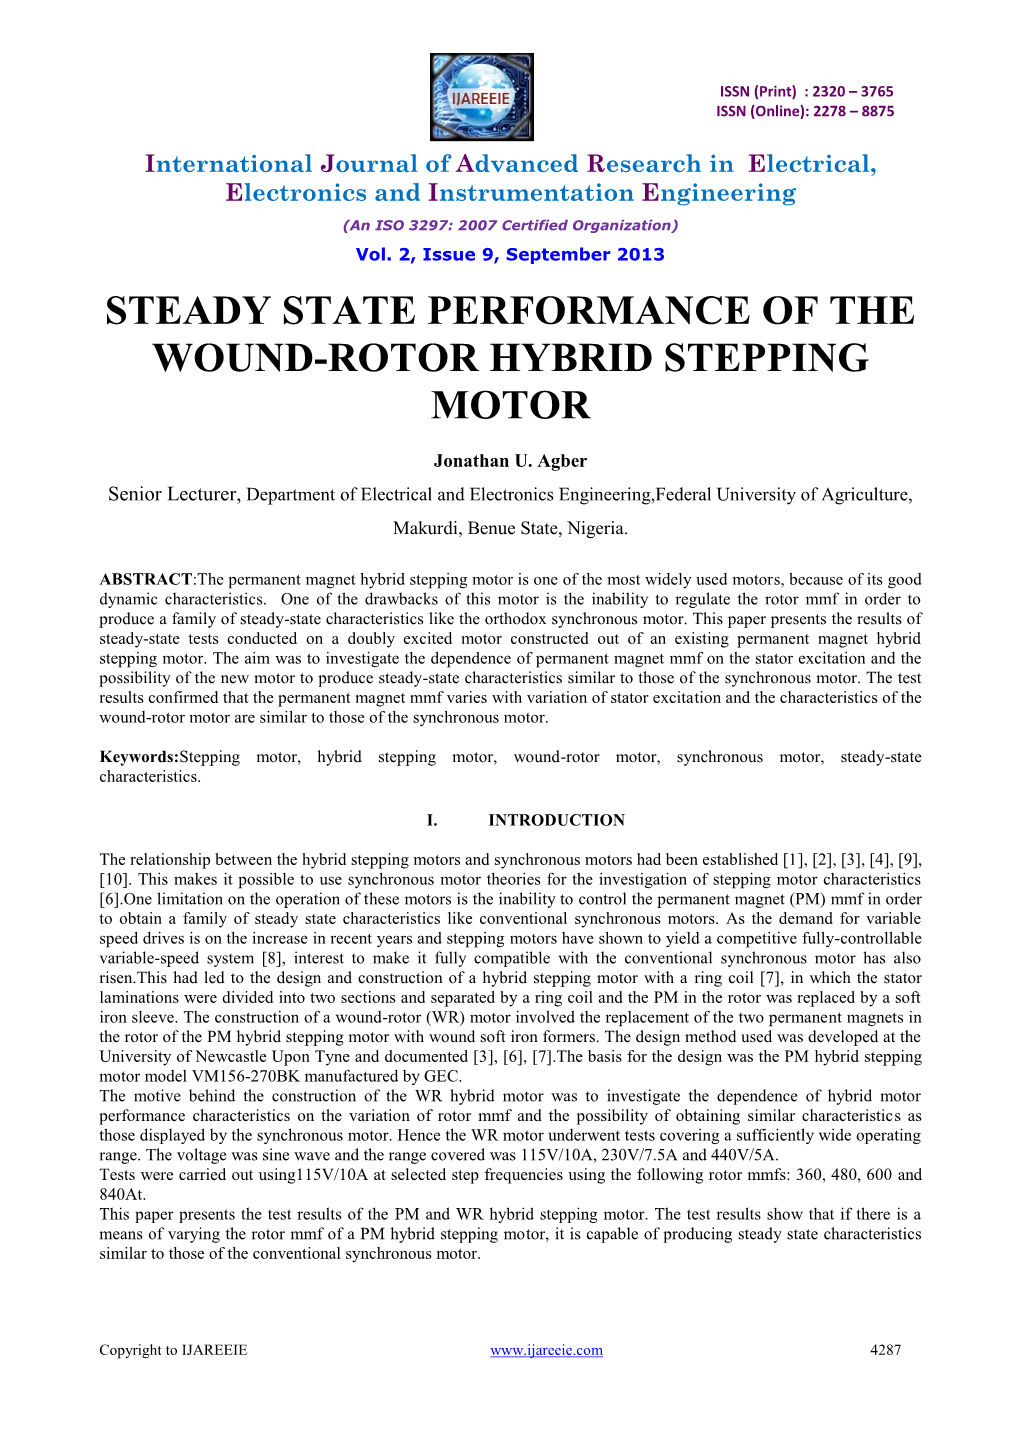 Steady State Performance of the Wound-Rotor Hybrid Stepping Motor